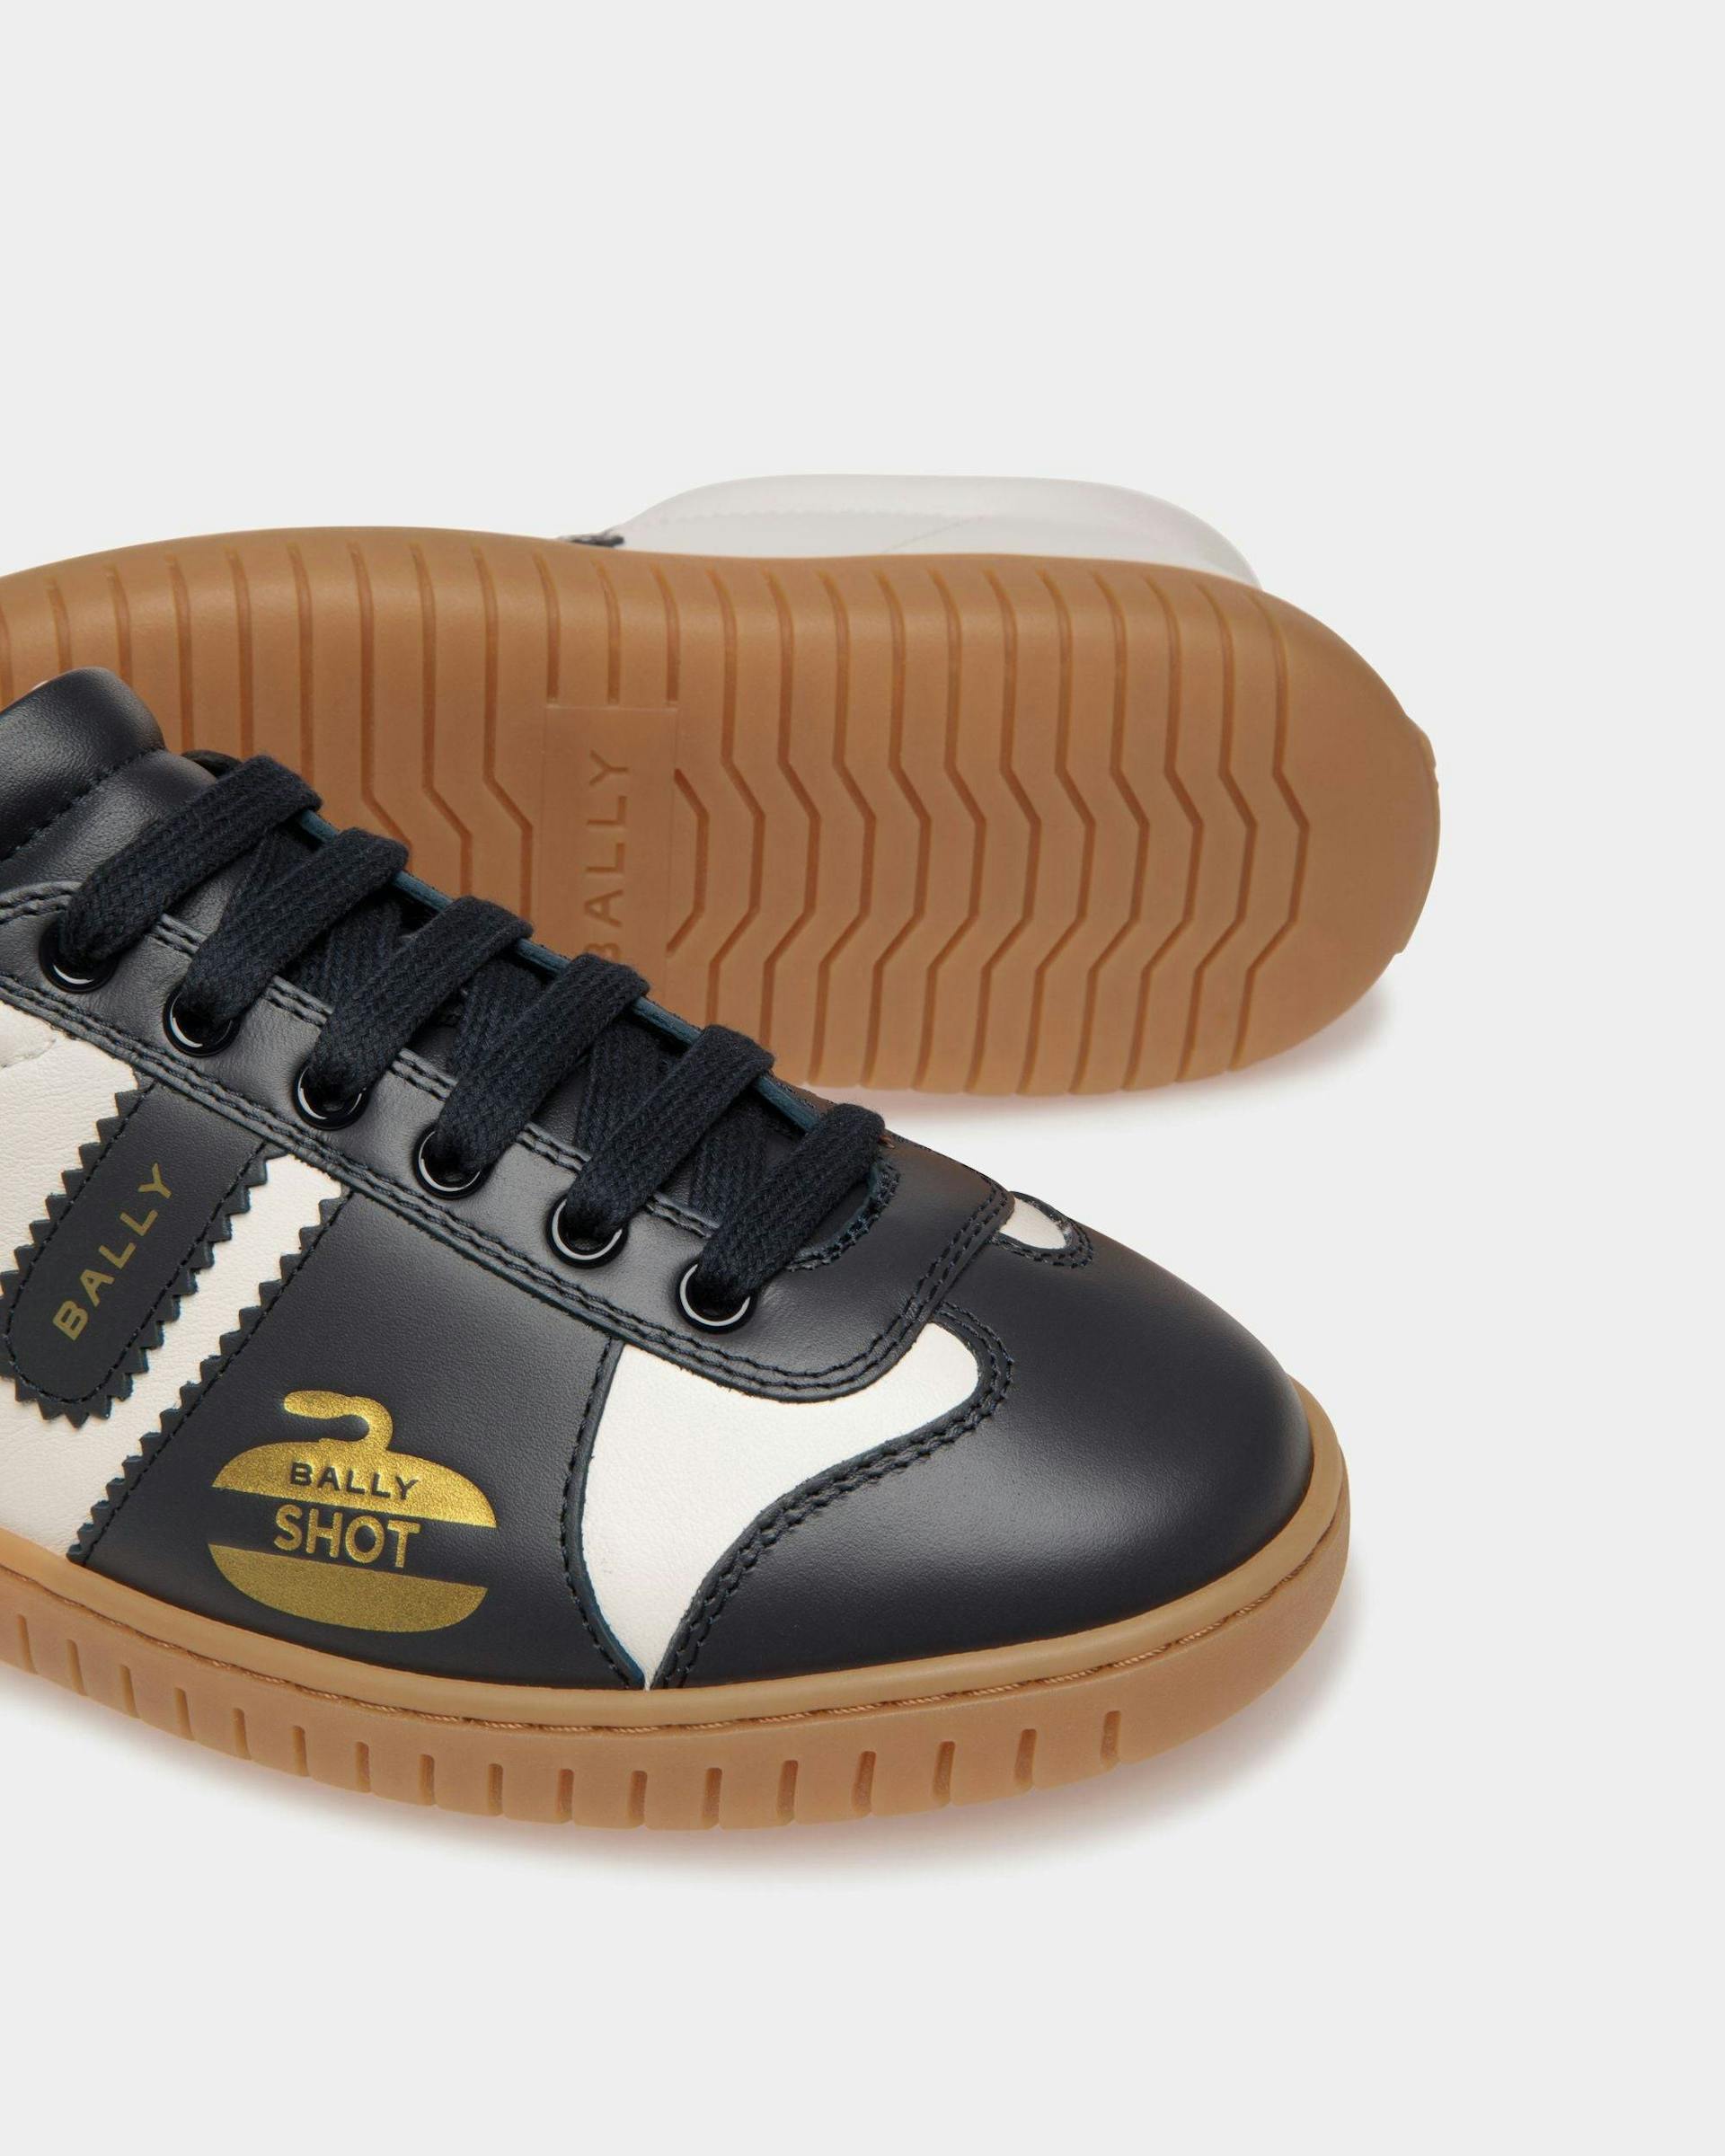 Men's Player Sneaker in Blue And White Leather | Bally | Still Life Below